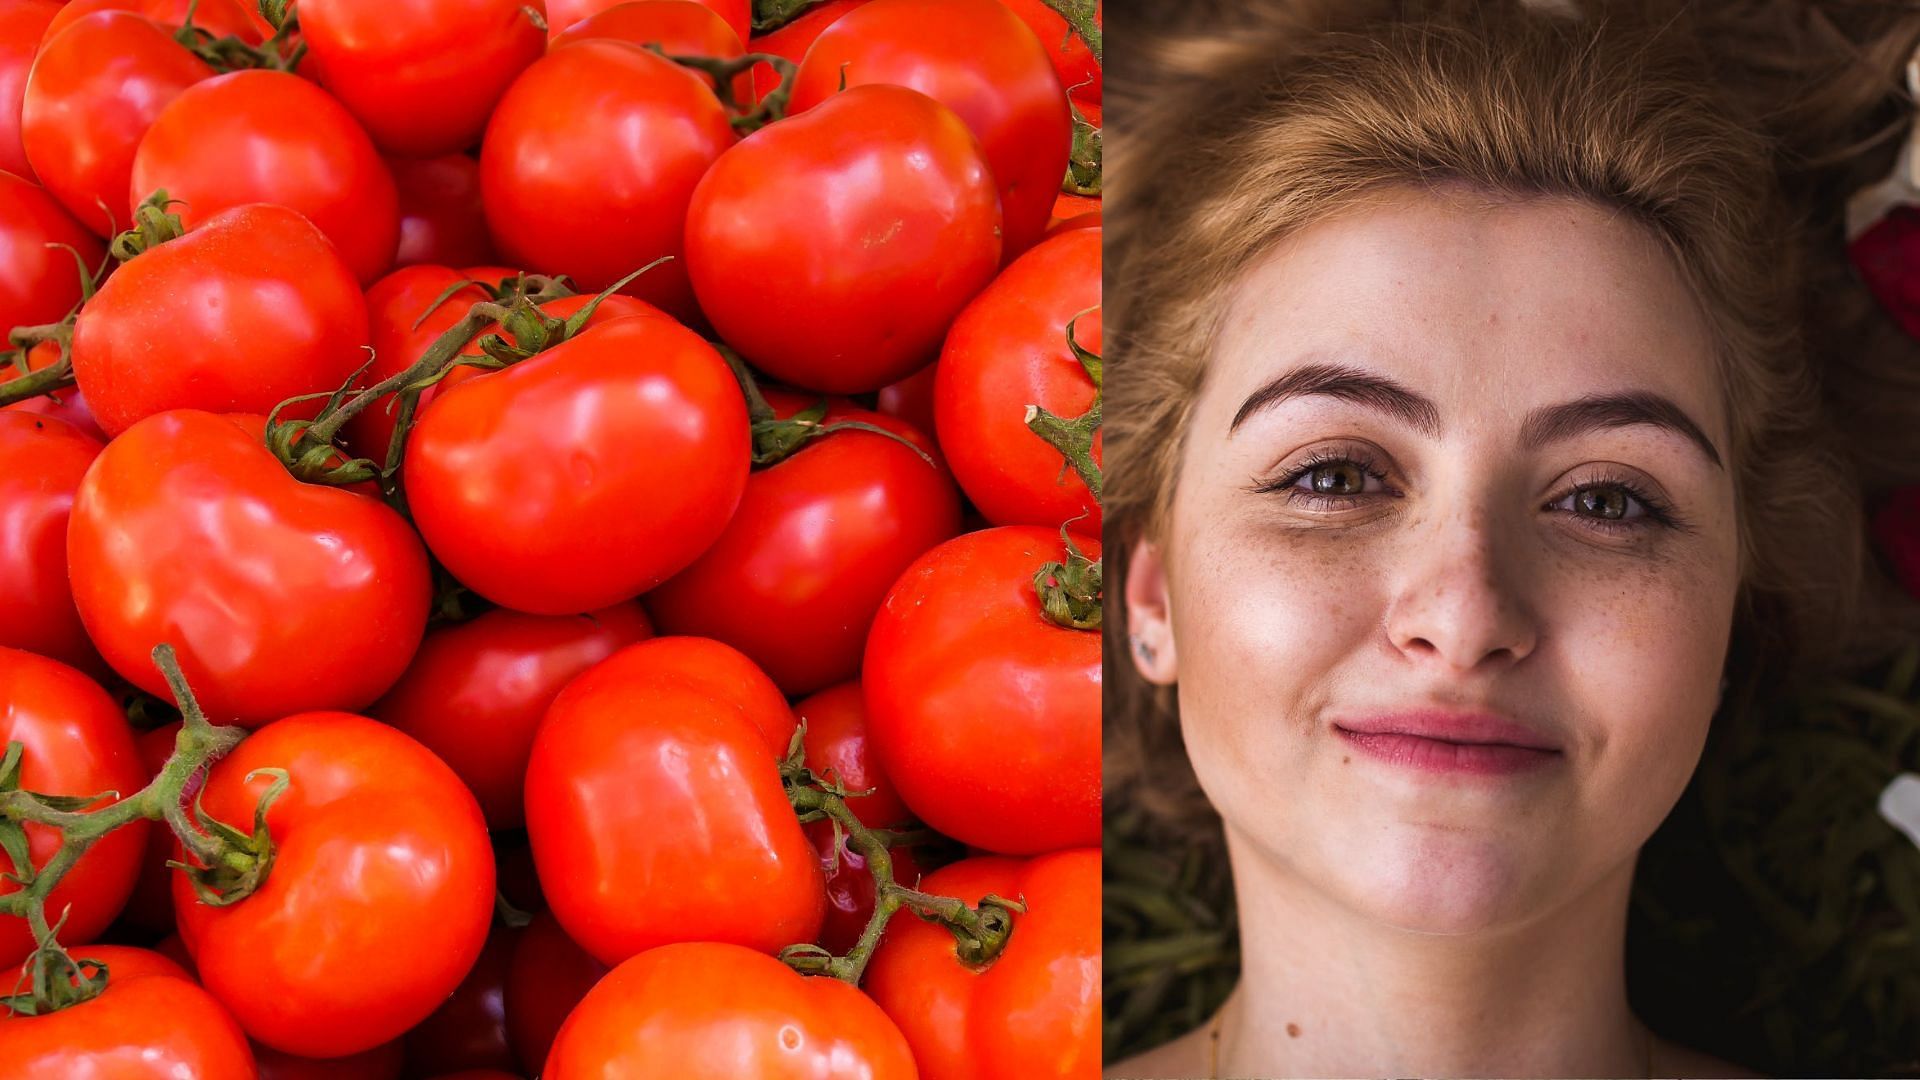 Importance of tomatoes for skin (image sourced via Pexels / Photo by Grid Design)